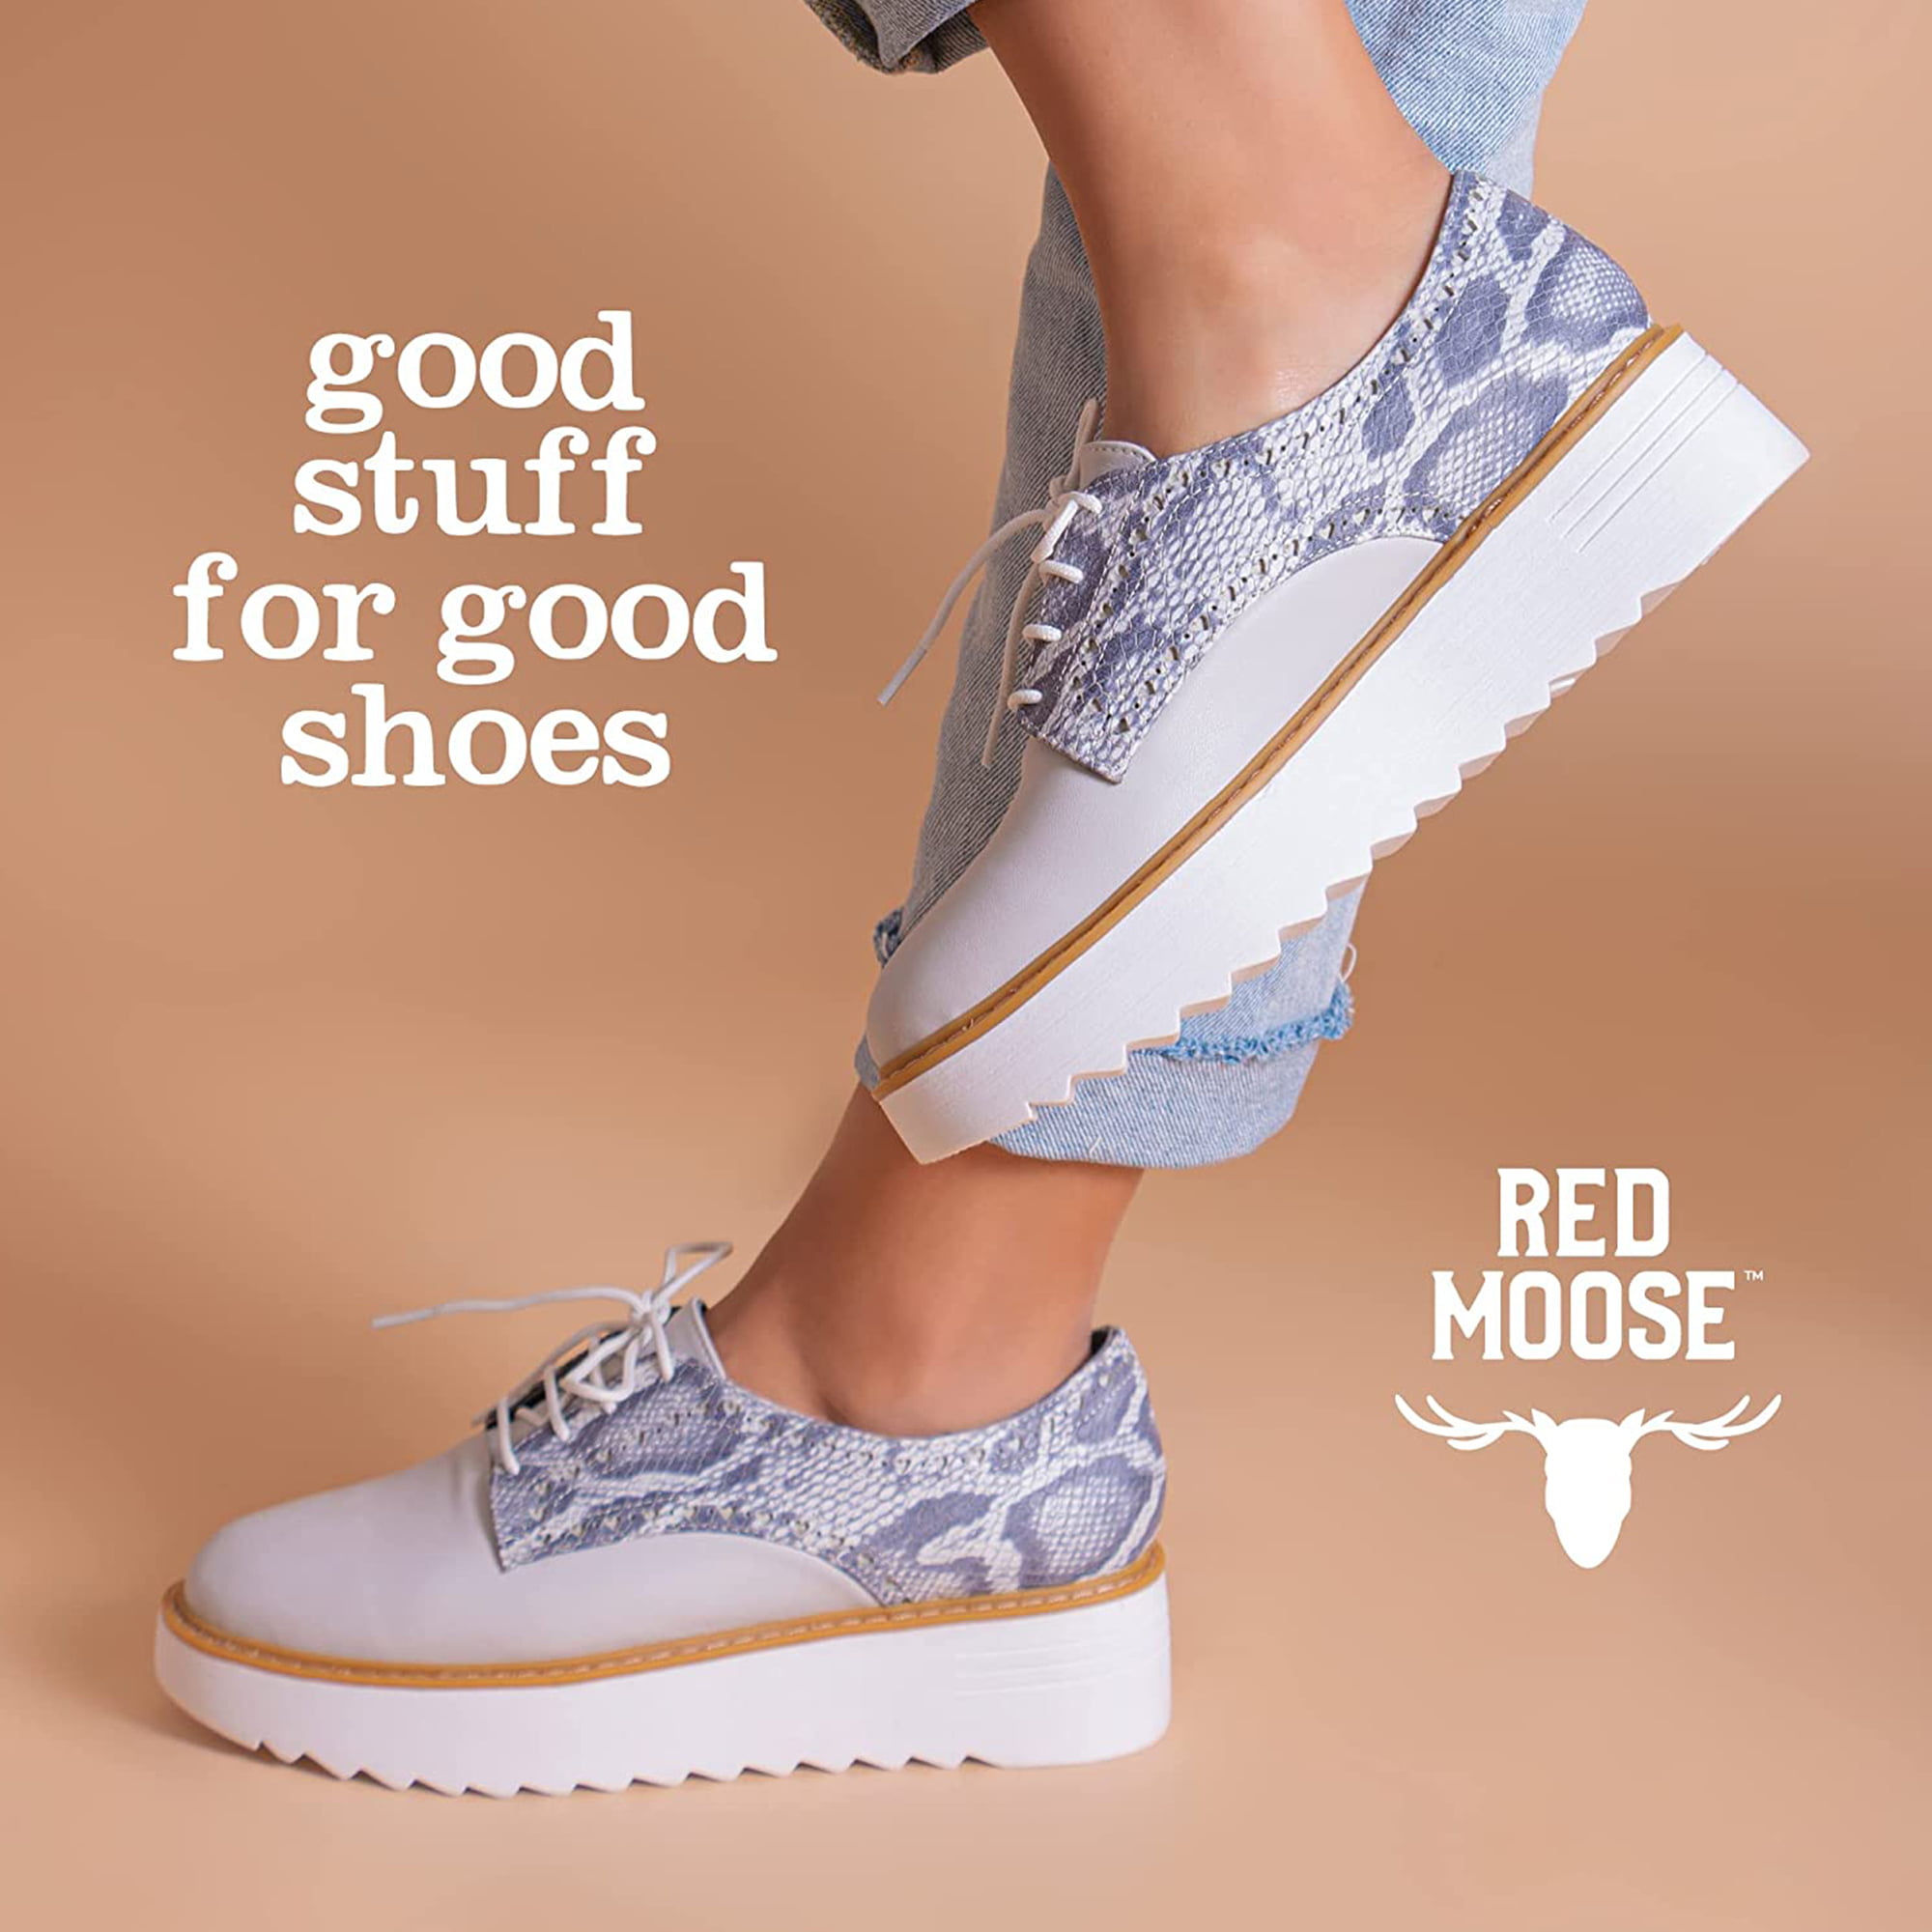 Review of #RED MOOSE Shoe and Sneaker Whitener by Gabrielle, 77